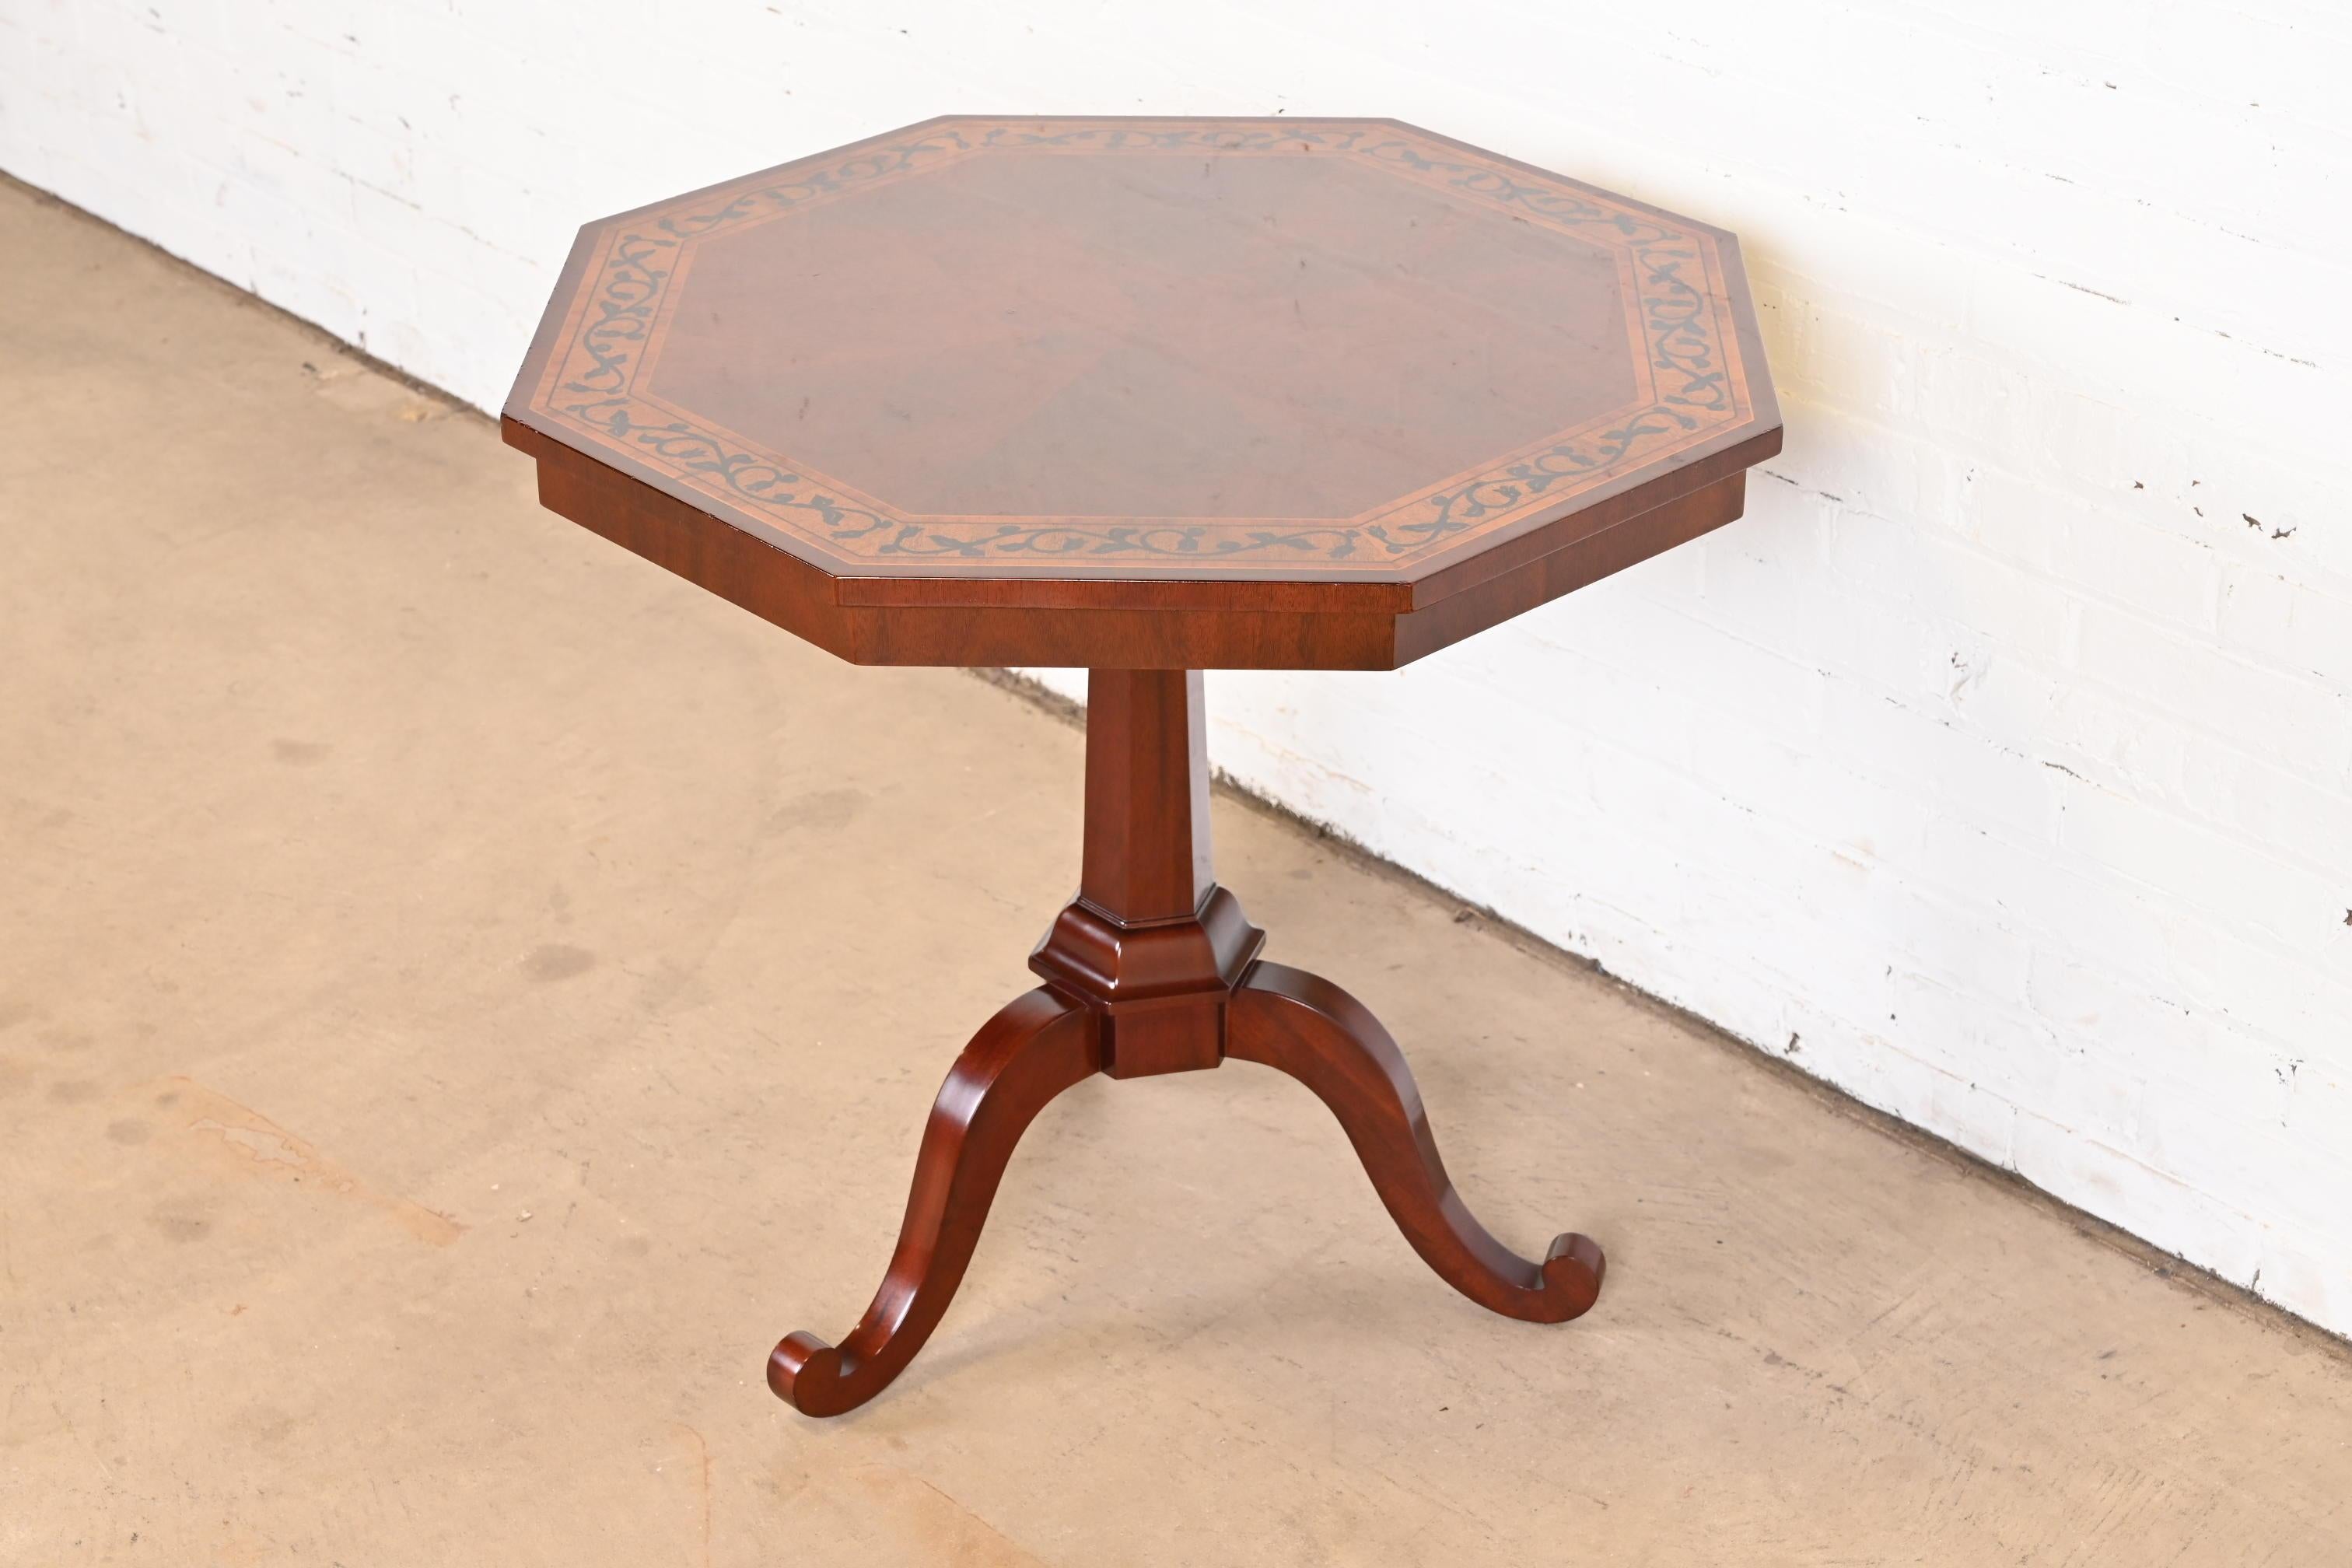 Kindel Furniture Regency Mahogany Inlaid Marquetry Pedestal Tea Table In Good Condition For Sale In South Bend, IN